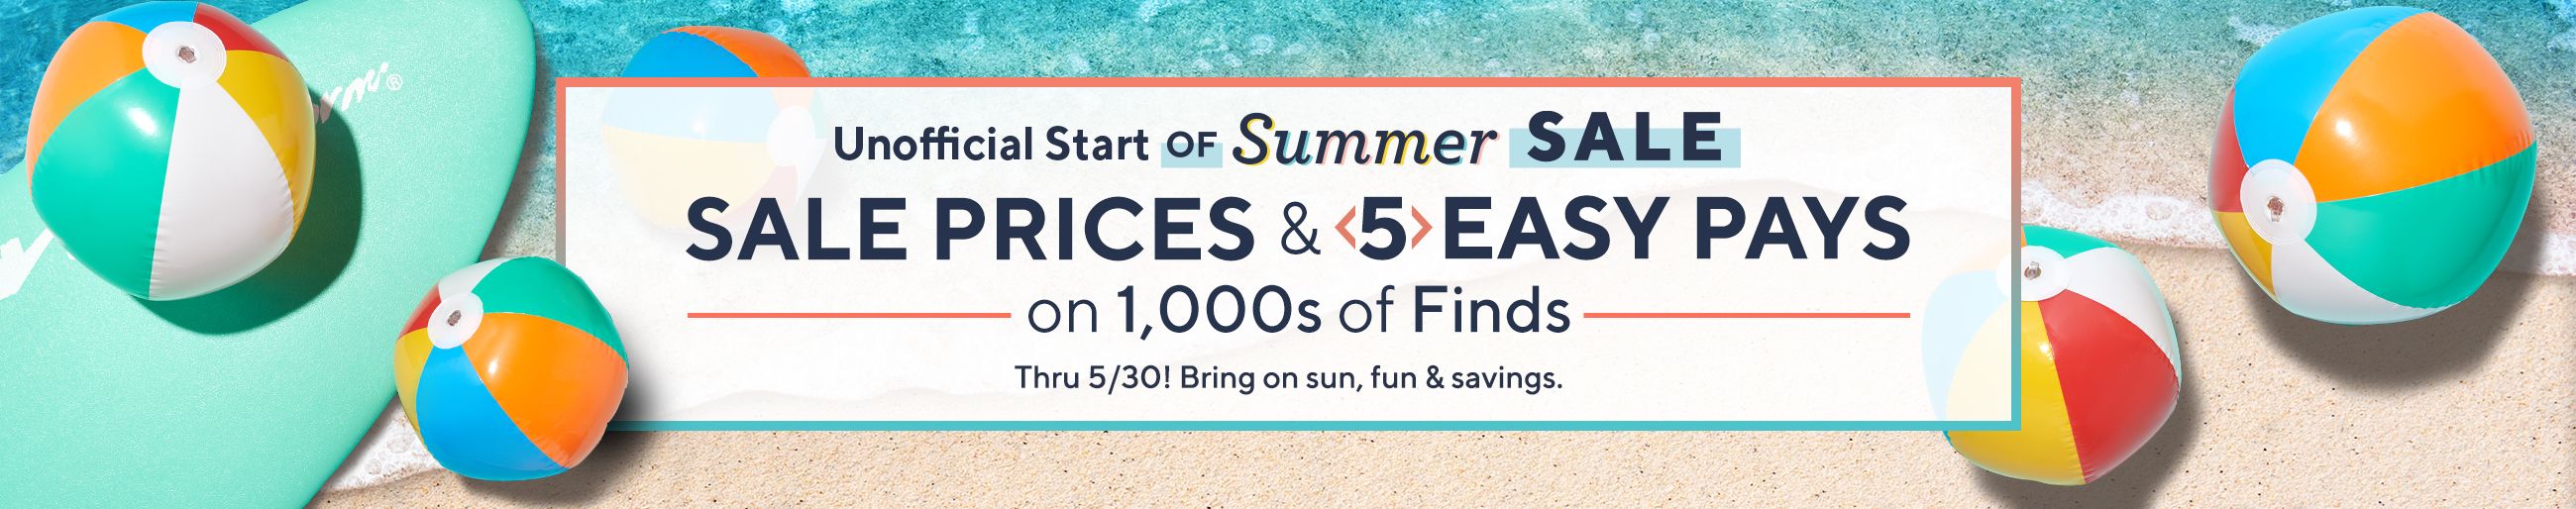 Unofficial Start of Summer Sale - Sale Prices & 5 Easy Pays on 1,000s of Finds Thru 5/30! Bring on sun, fun & savings.